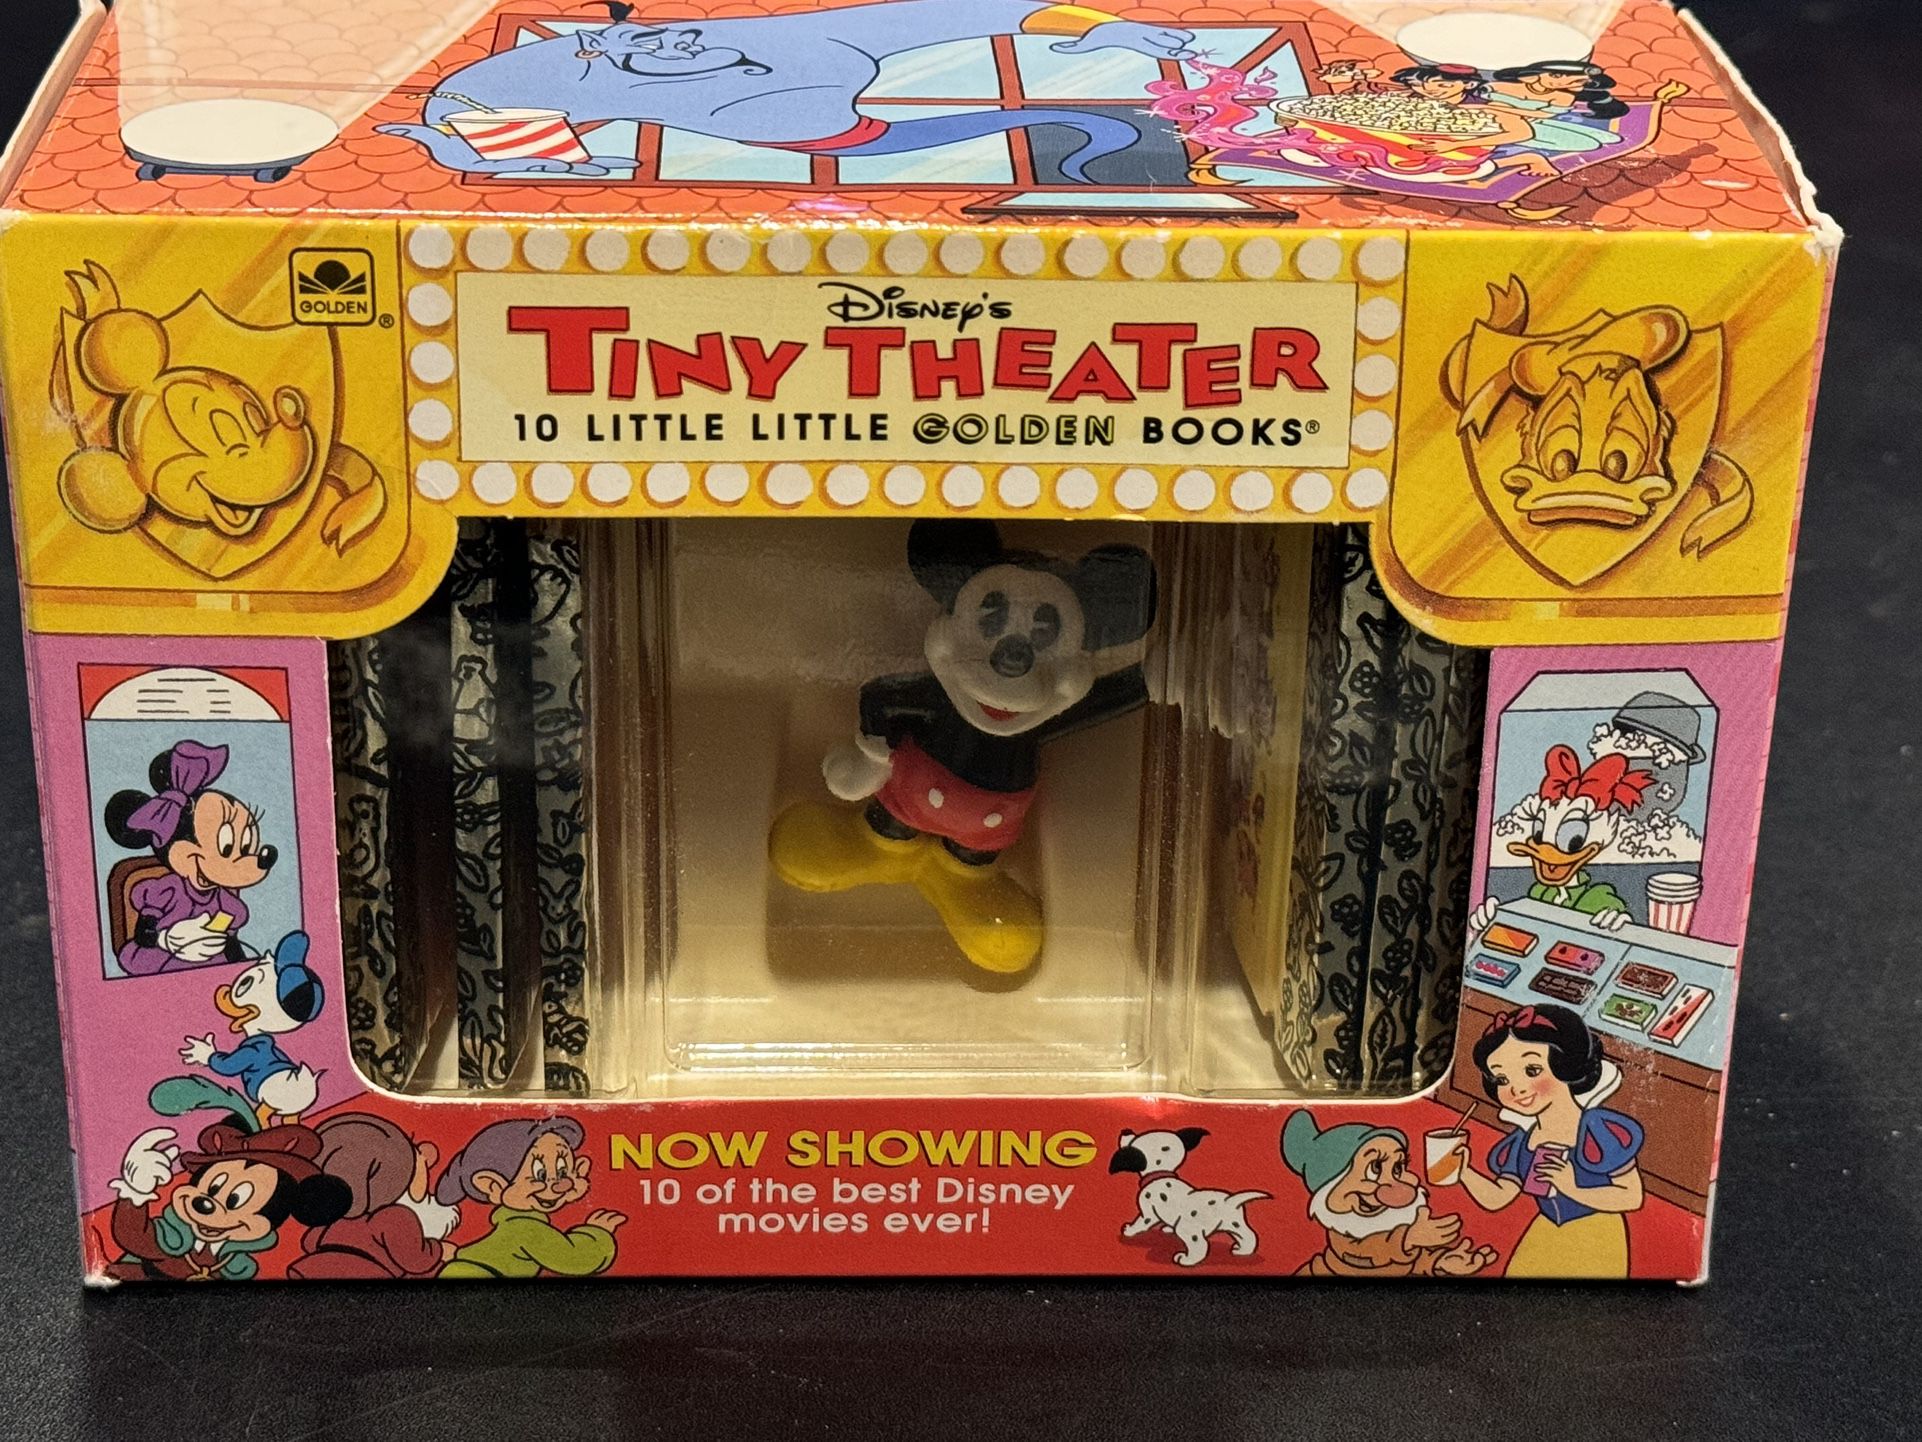  The product is a 1993 Disney's Tiny Theatre set that includes 10 Little Golden Books and a Mickey Mouse figure. The figure is part of the Mickey & Fr